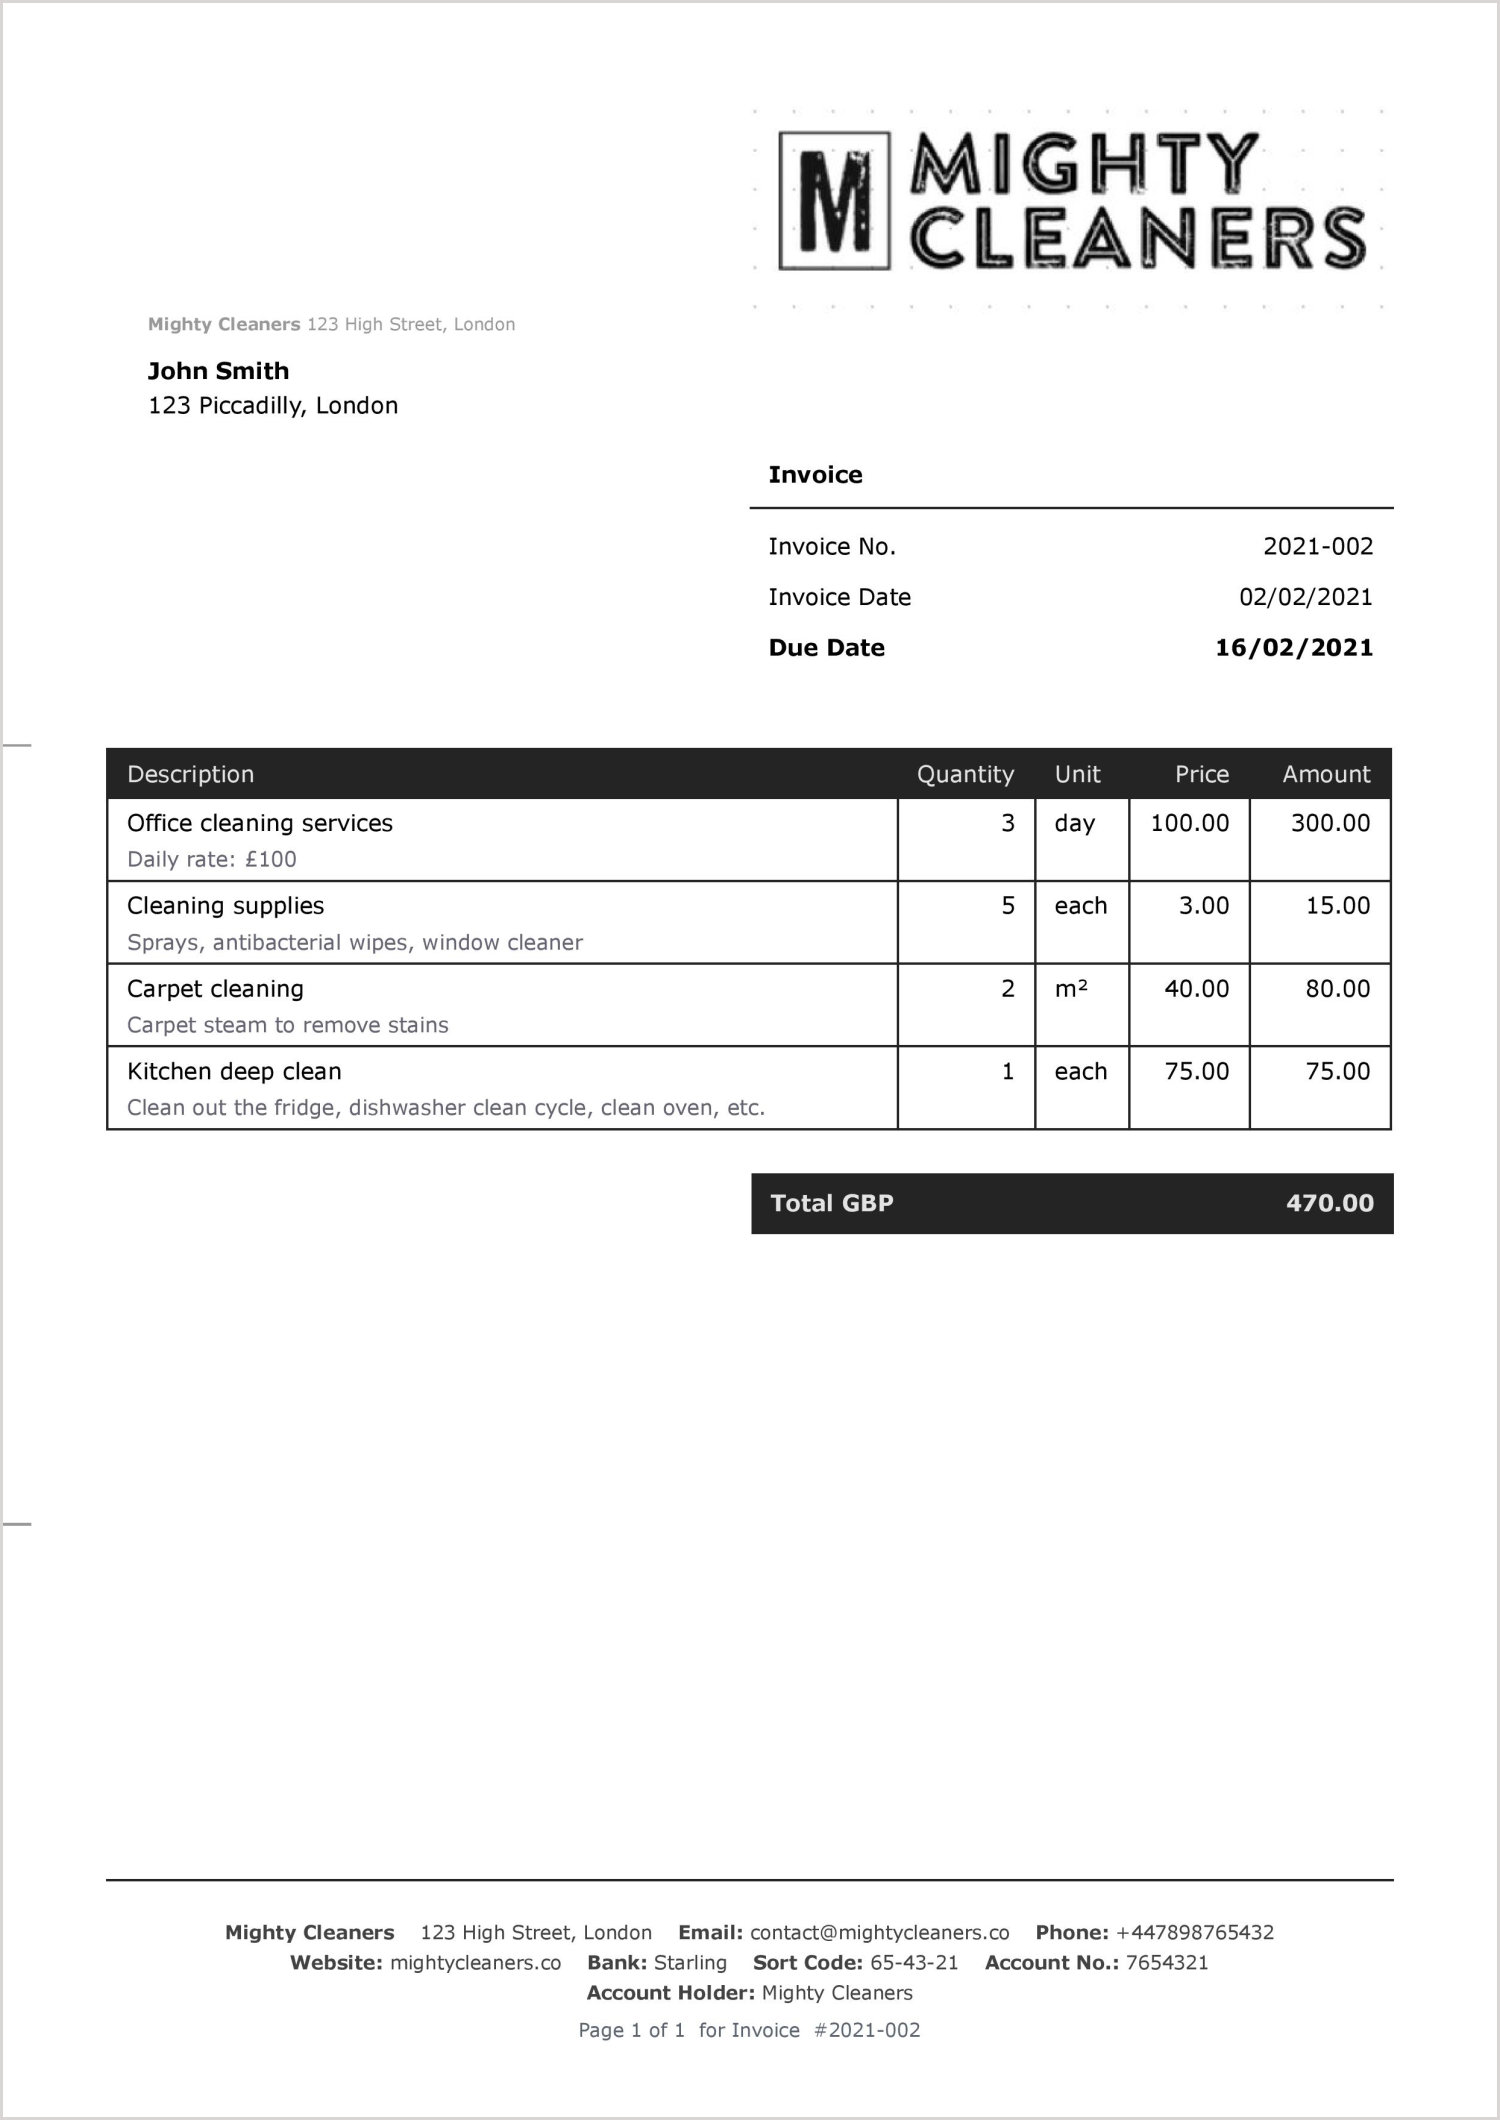 Cleaning Payment Receipt Template